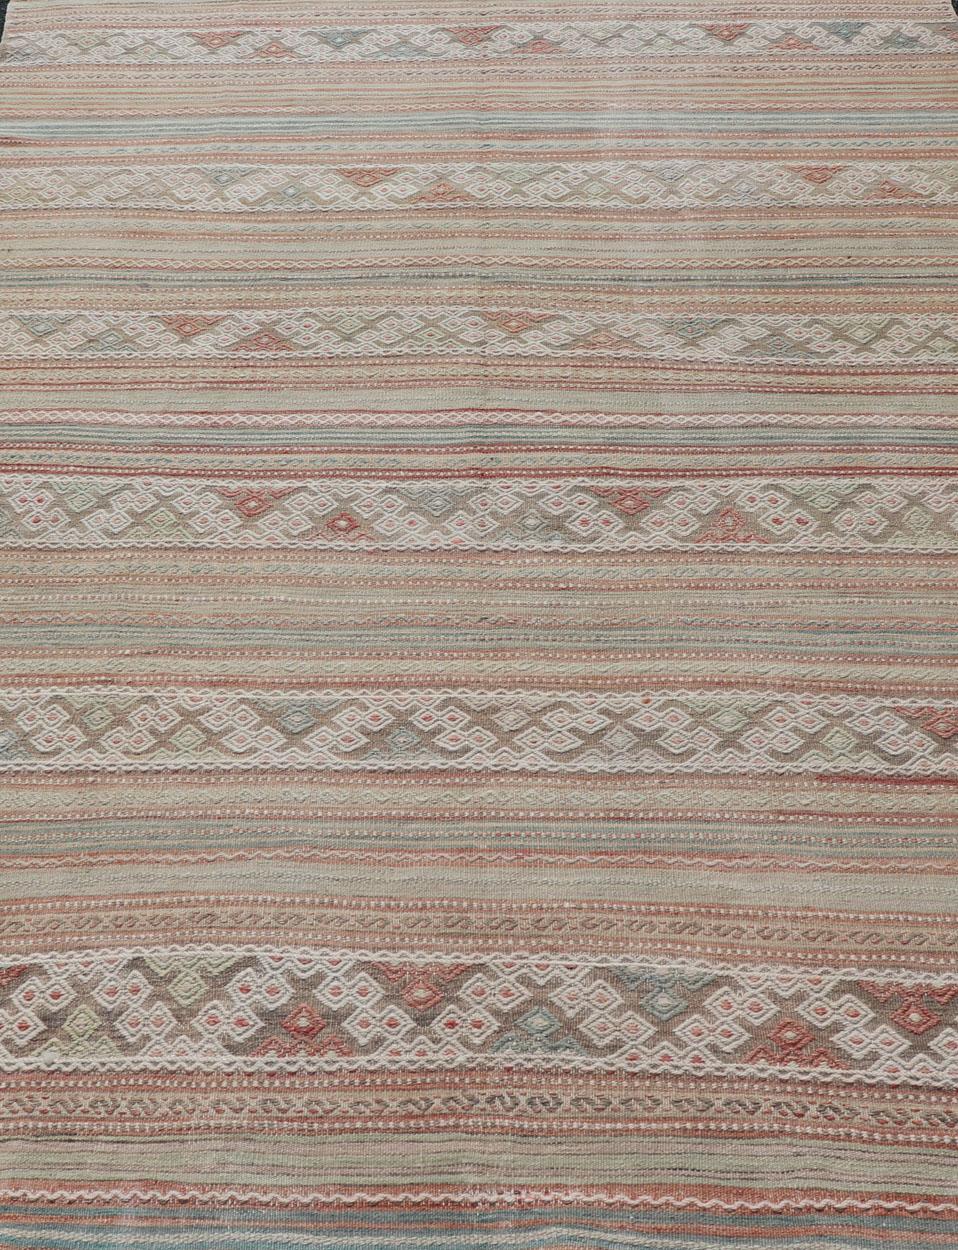 Colorful Vintage Embroidered Kilim with Stripes and Alternating Geometric Motifs For Sale 1